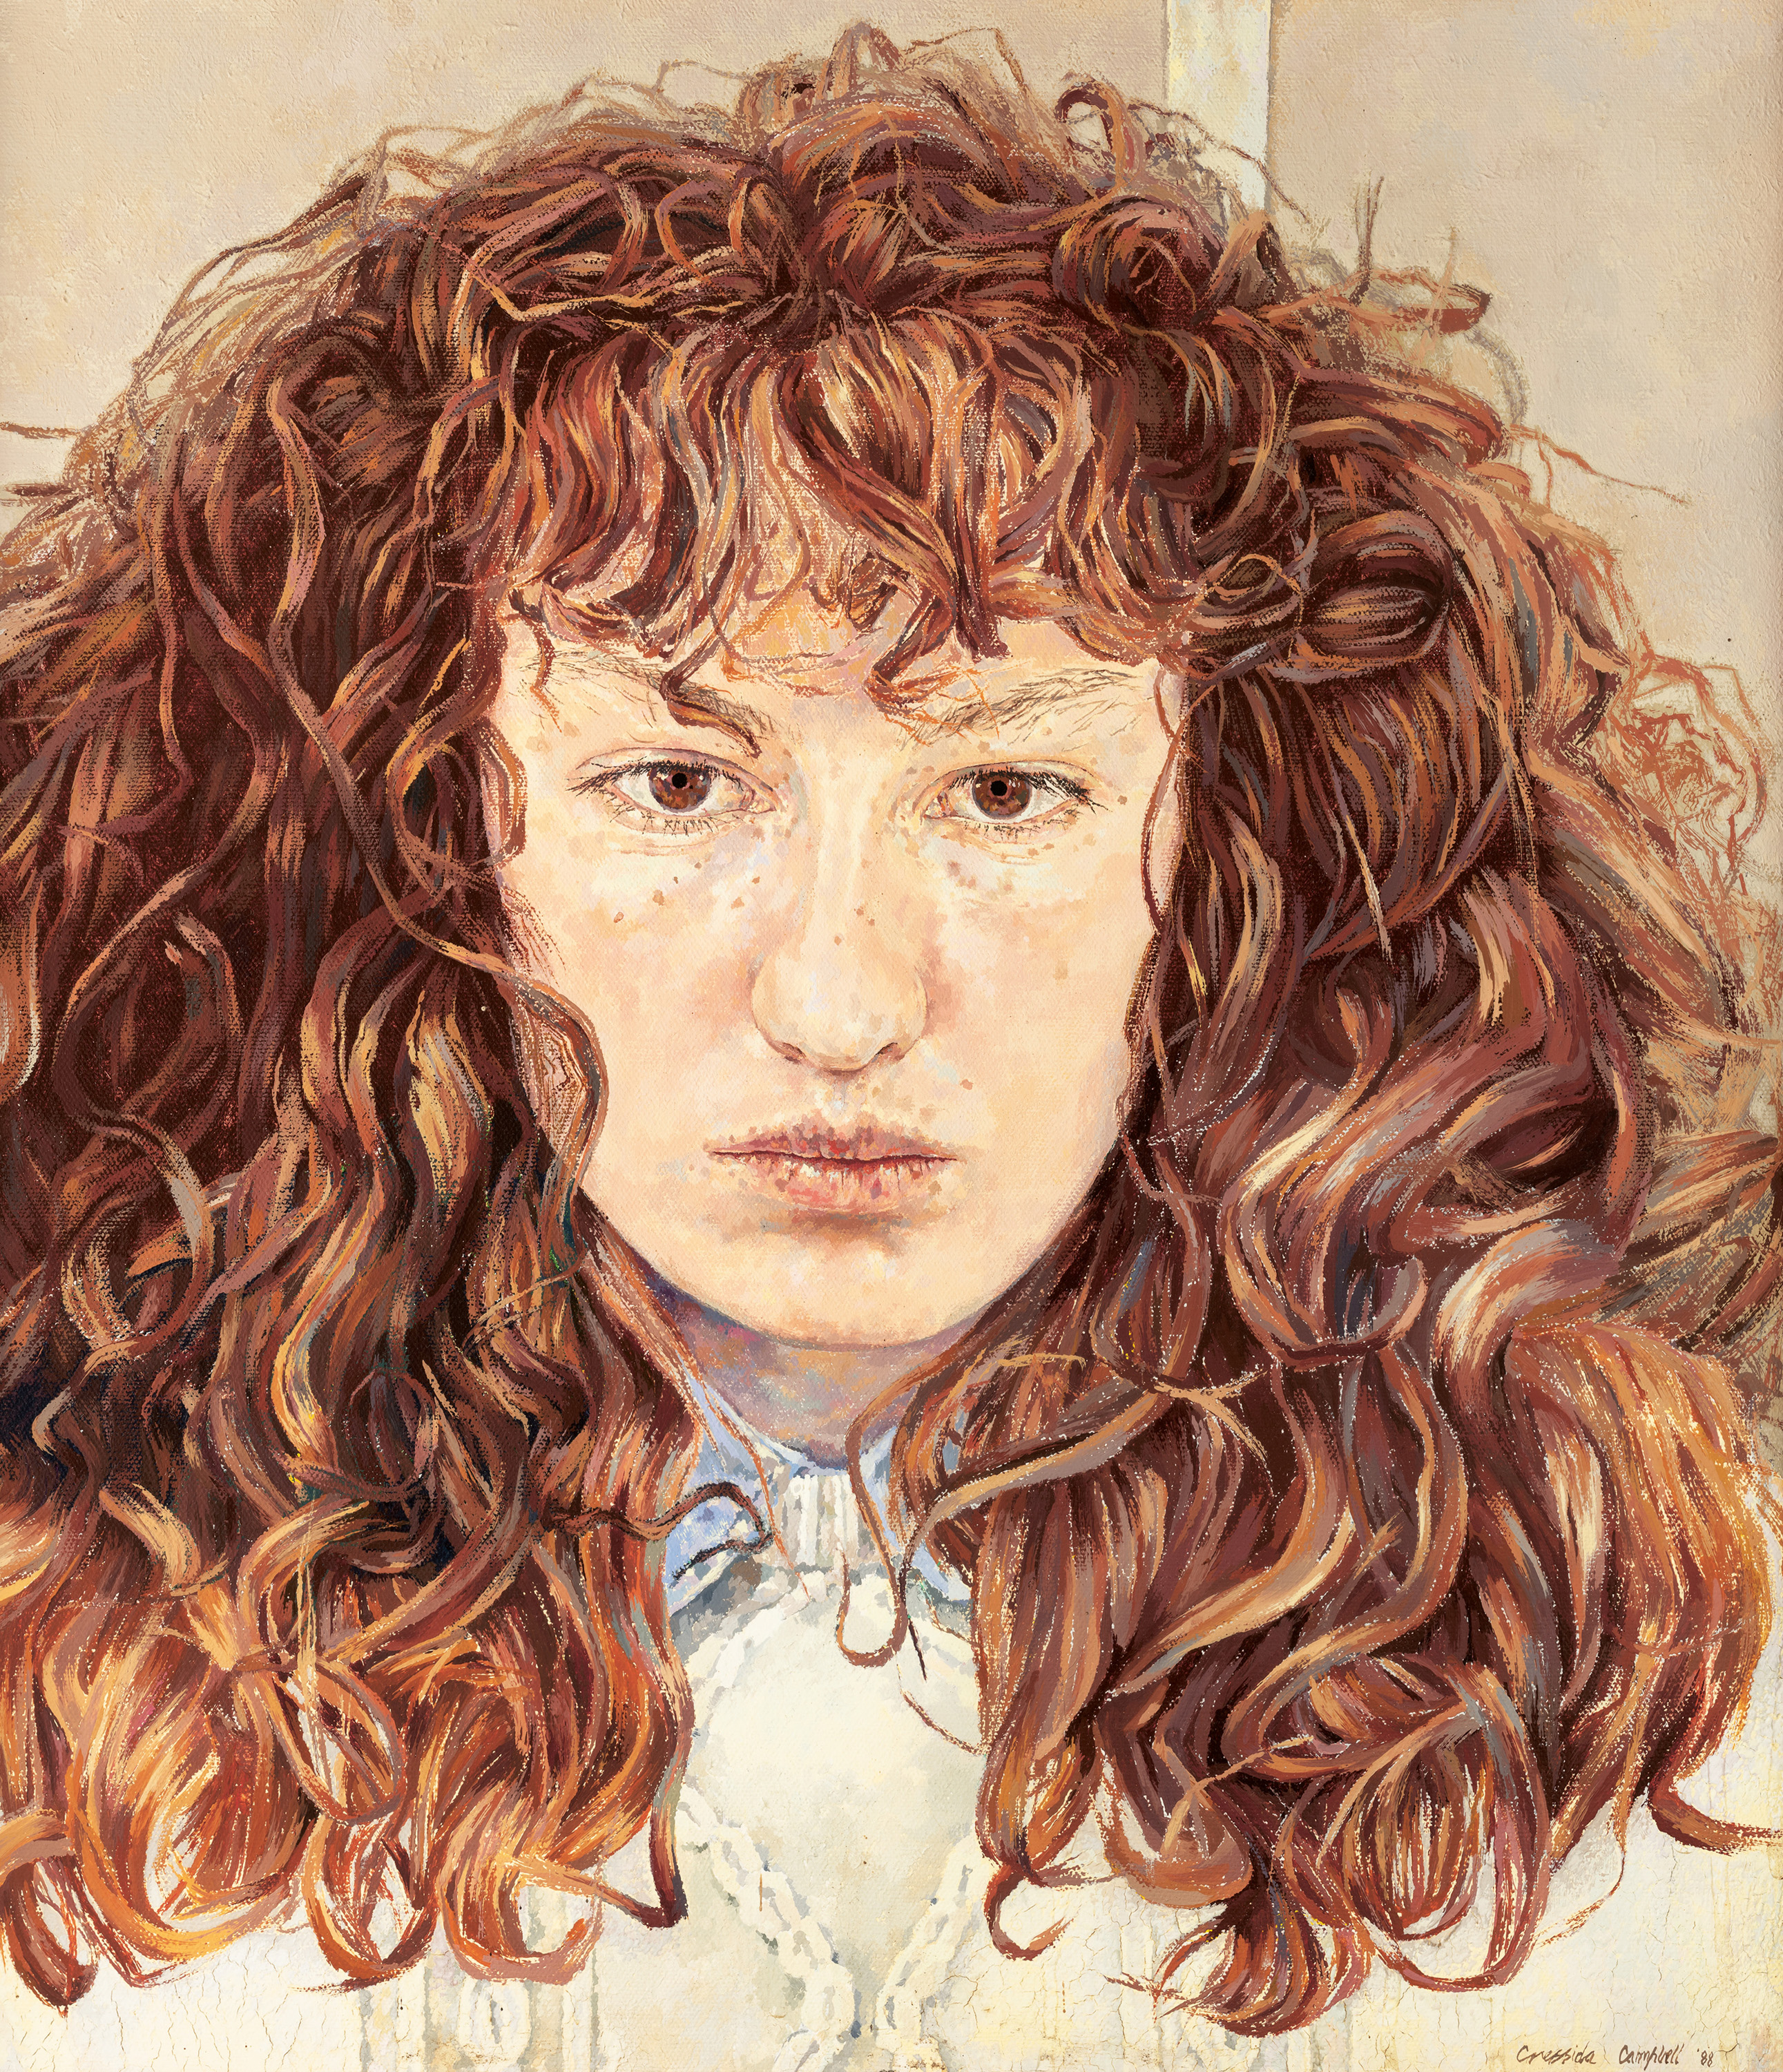 A painting of a woman in her 20s, with a stern expression.  She has bushy brown hair and bangs and brown eyes.